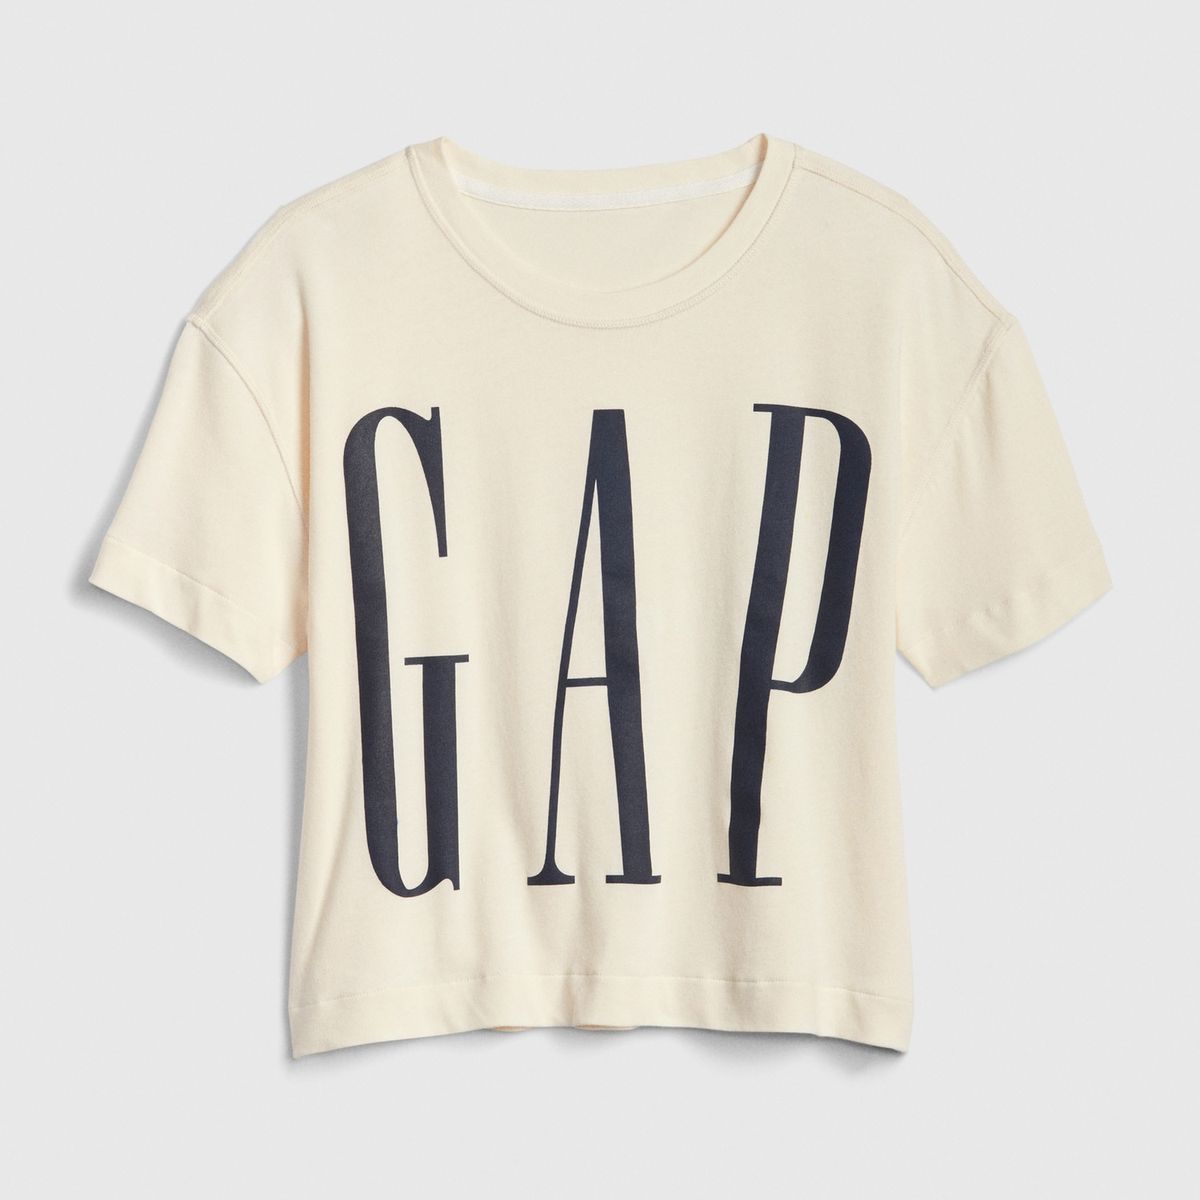 Gap’s Friends and Family Sale Has Great Comfy Clothes Deals | Travel ...